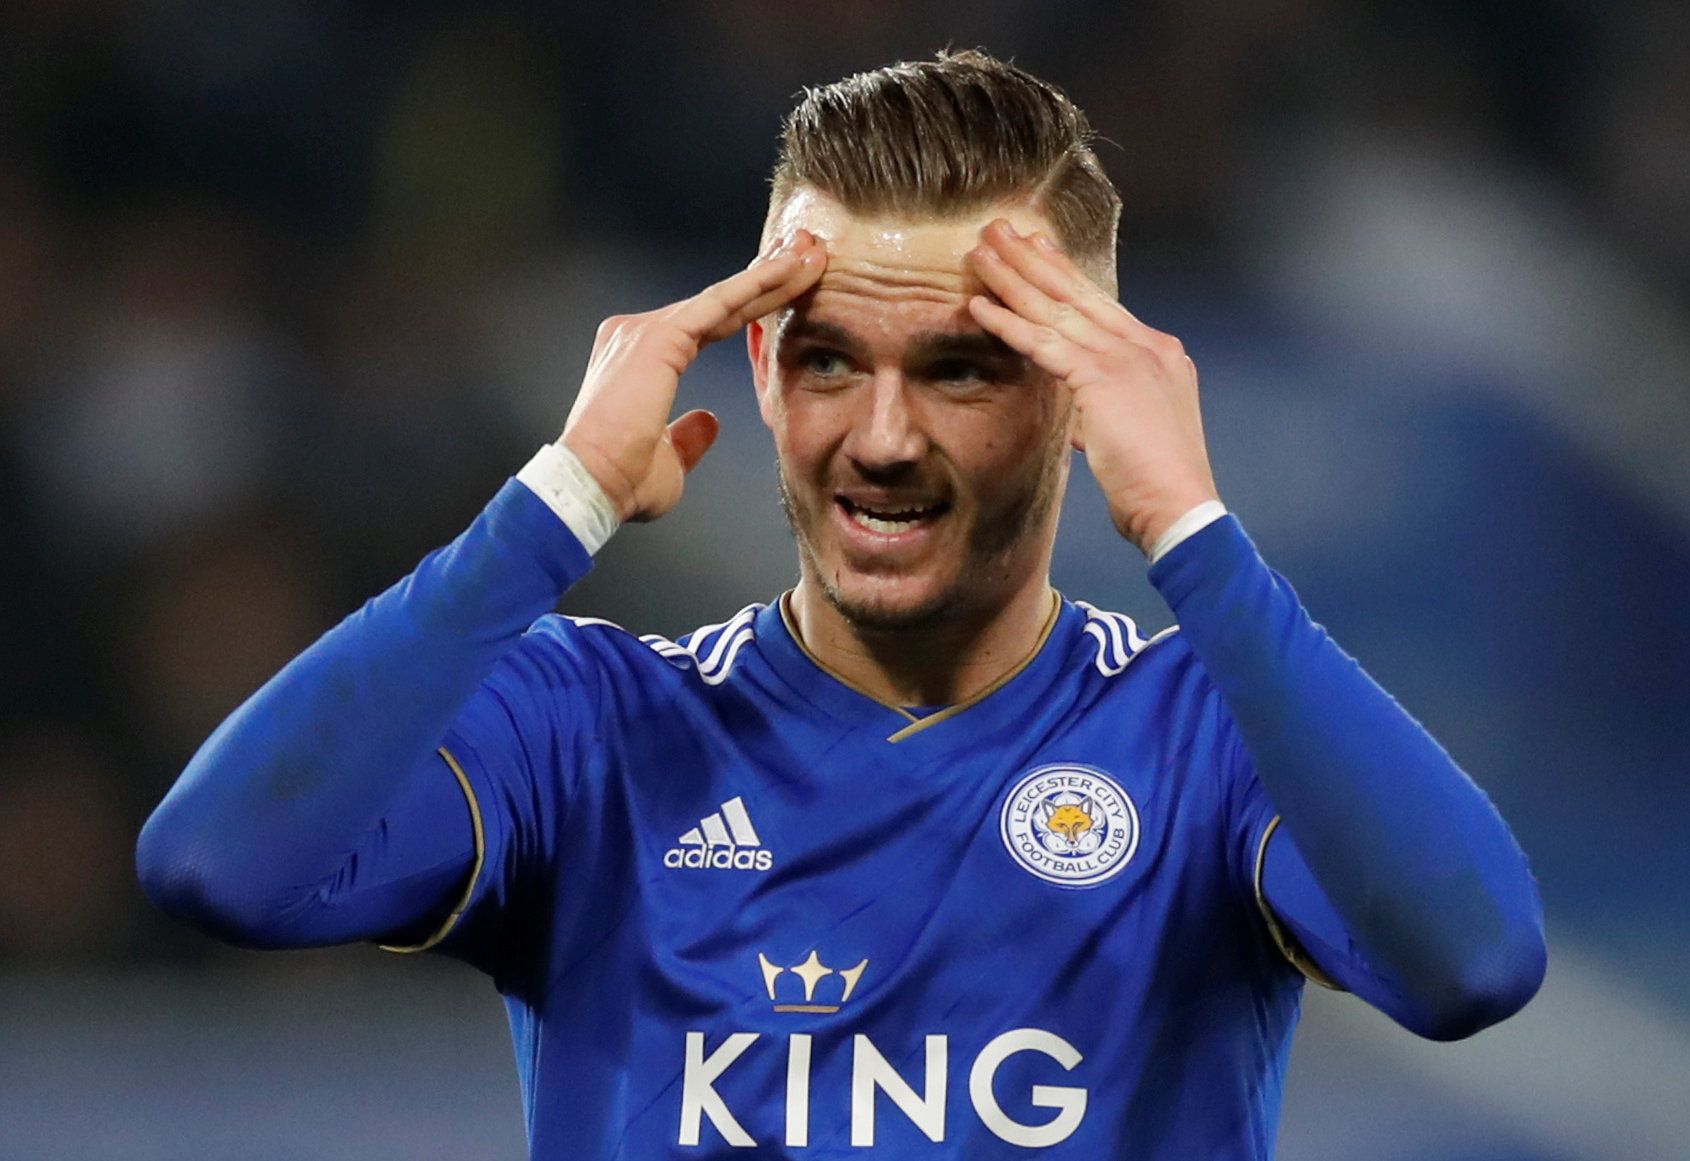 Soccer Football - Premier League - Leicester City v Brighton &amp; Hove Albion - King Power Stadium, Leicester, Britain - February 26, 2019  Leicester City's James Maddison looks dejected      Action Images via Reuters/Carl Recine  EDITORIAL USE ONLY. No use with unauthorized audio, video, data, fixture lists, club/league logos or 